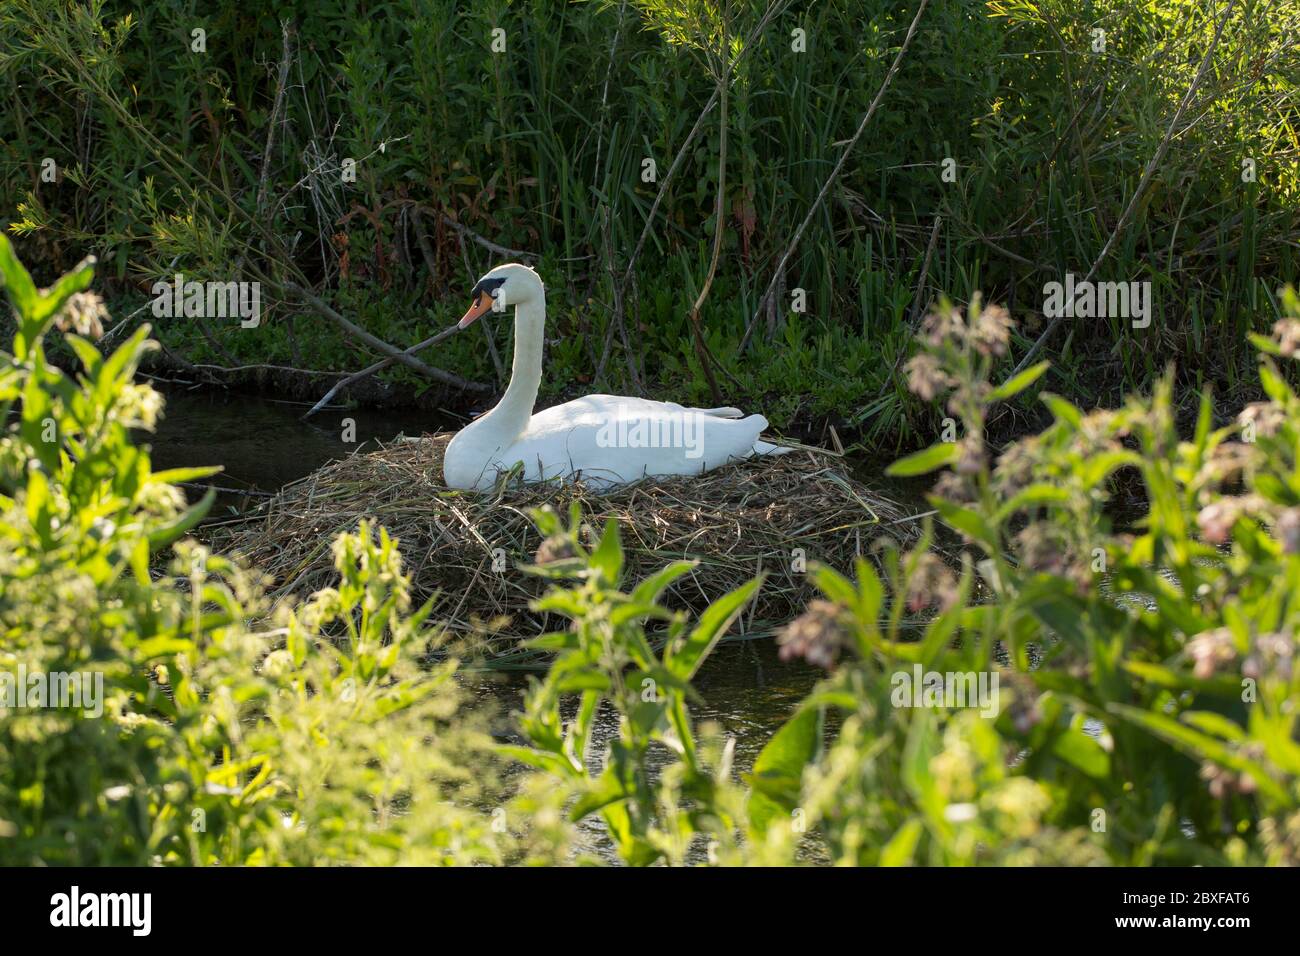 A Mute swan, Cygnus olor, on its nest in a river. Dorset England UK GB Stock Photo